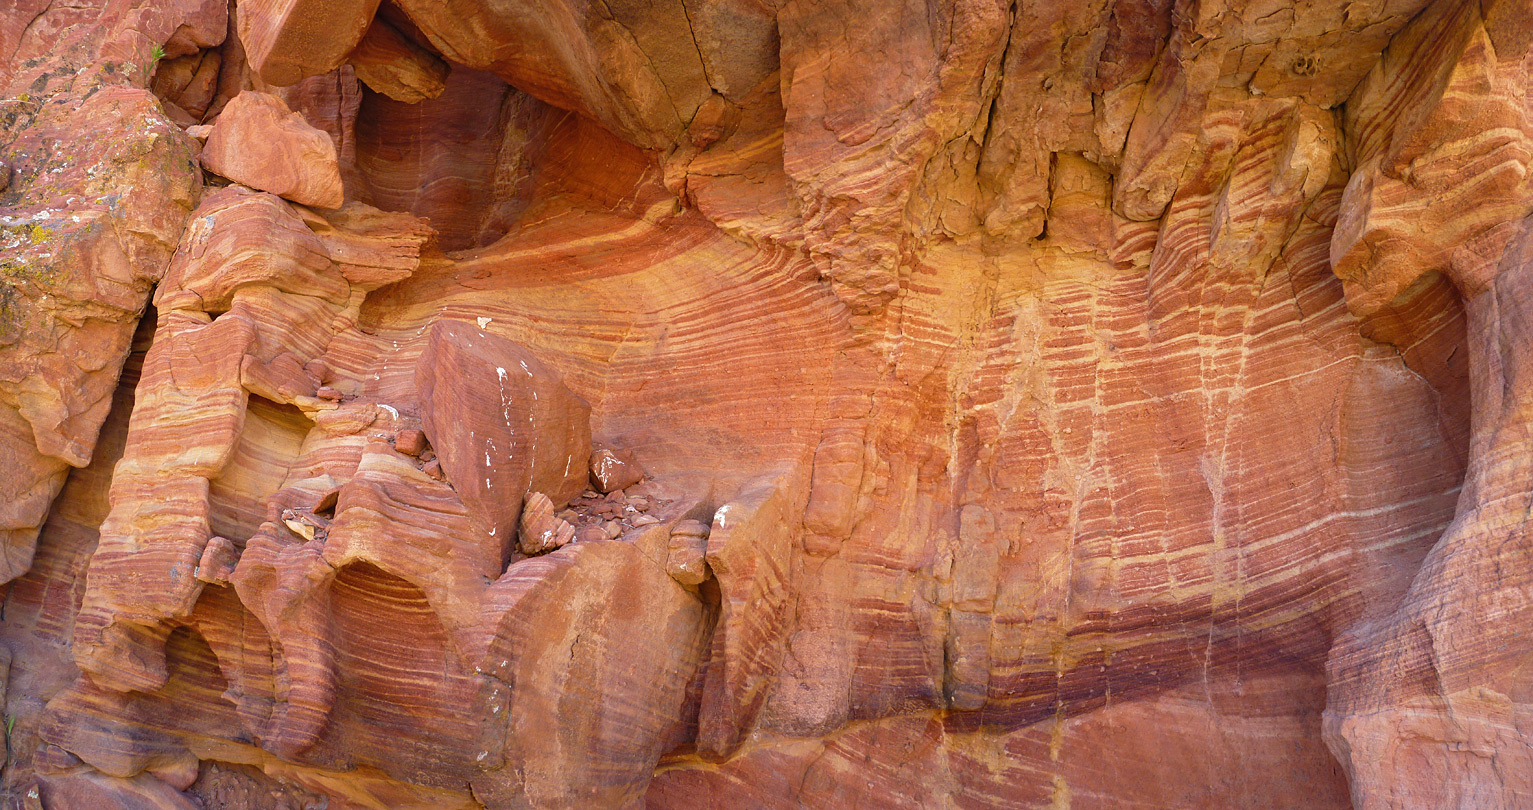 Weathered cliff face